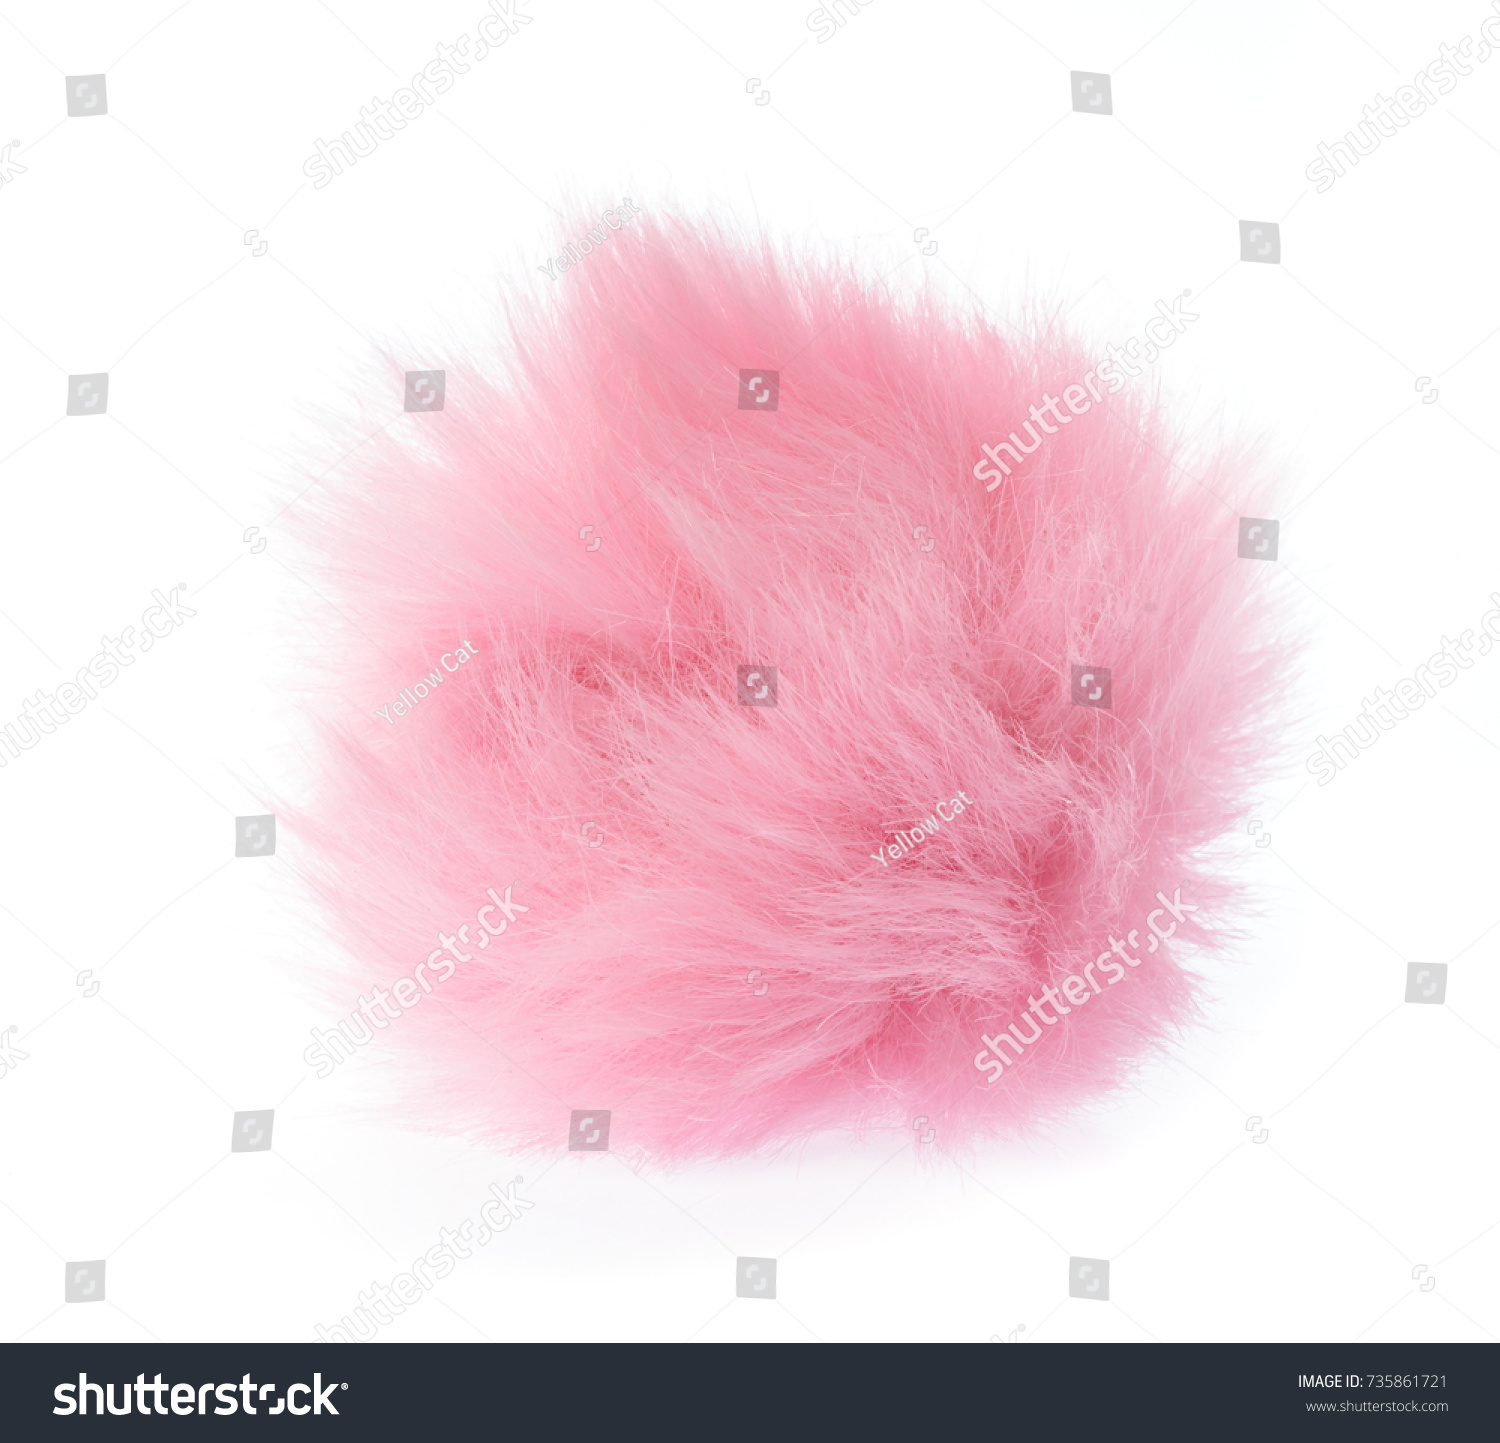 Fur ball isolated on white background #735861721